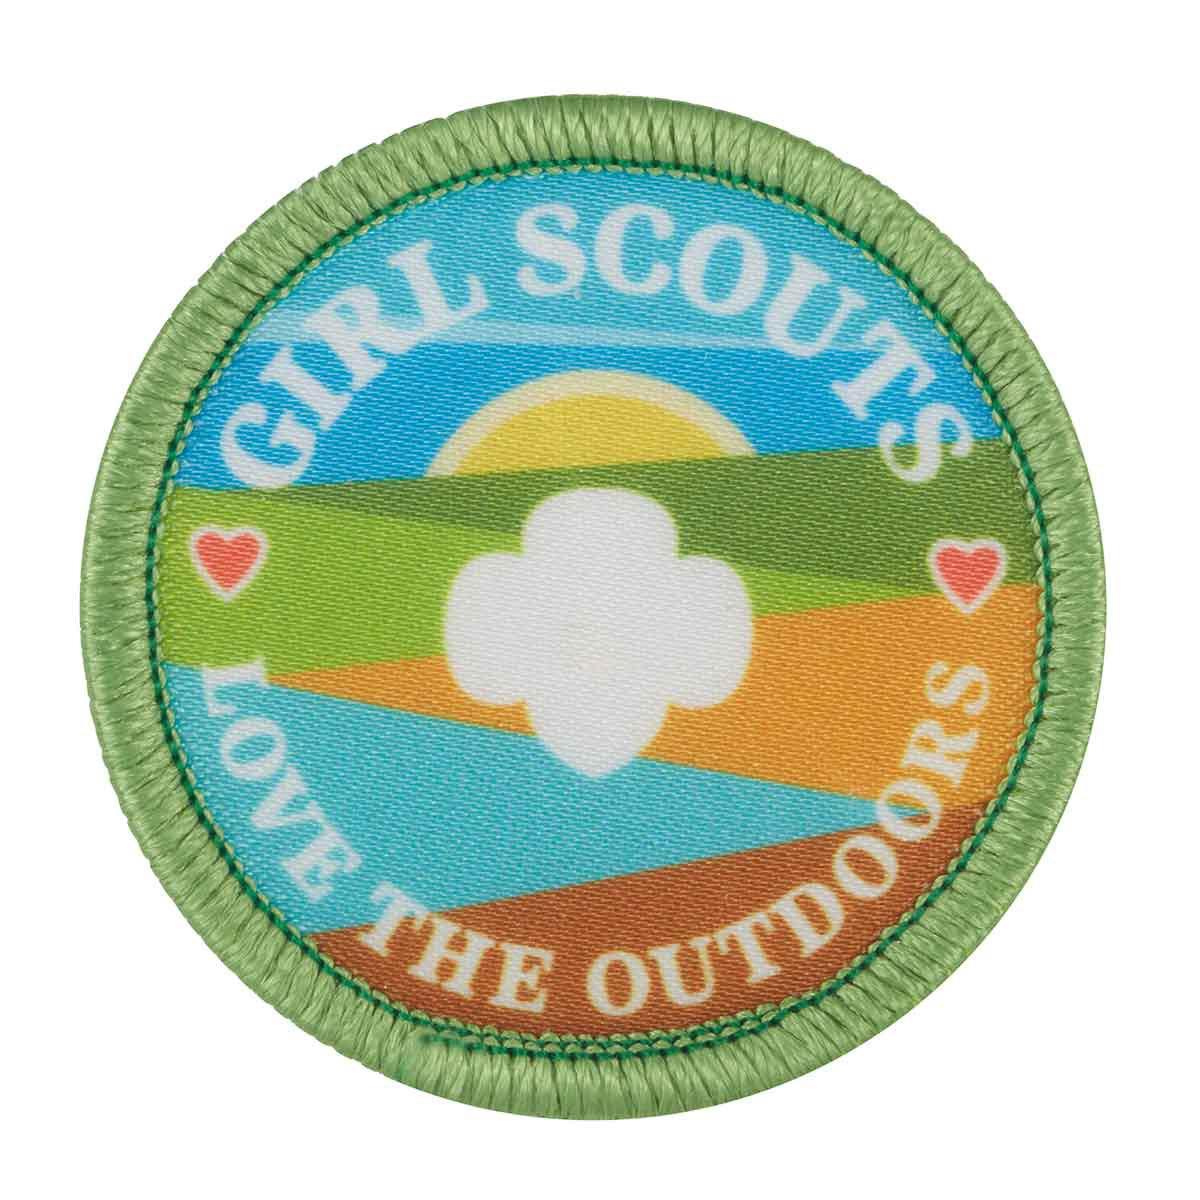 Girl Scouts Camporee Patch - PatchSuperstore